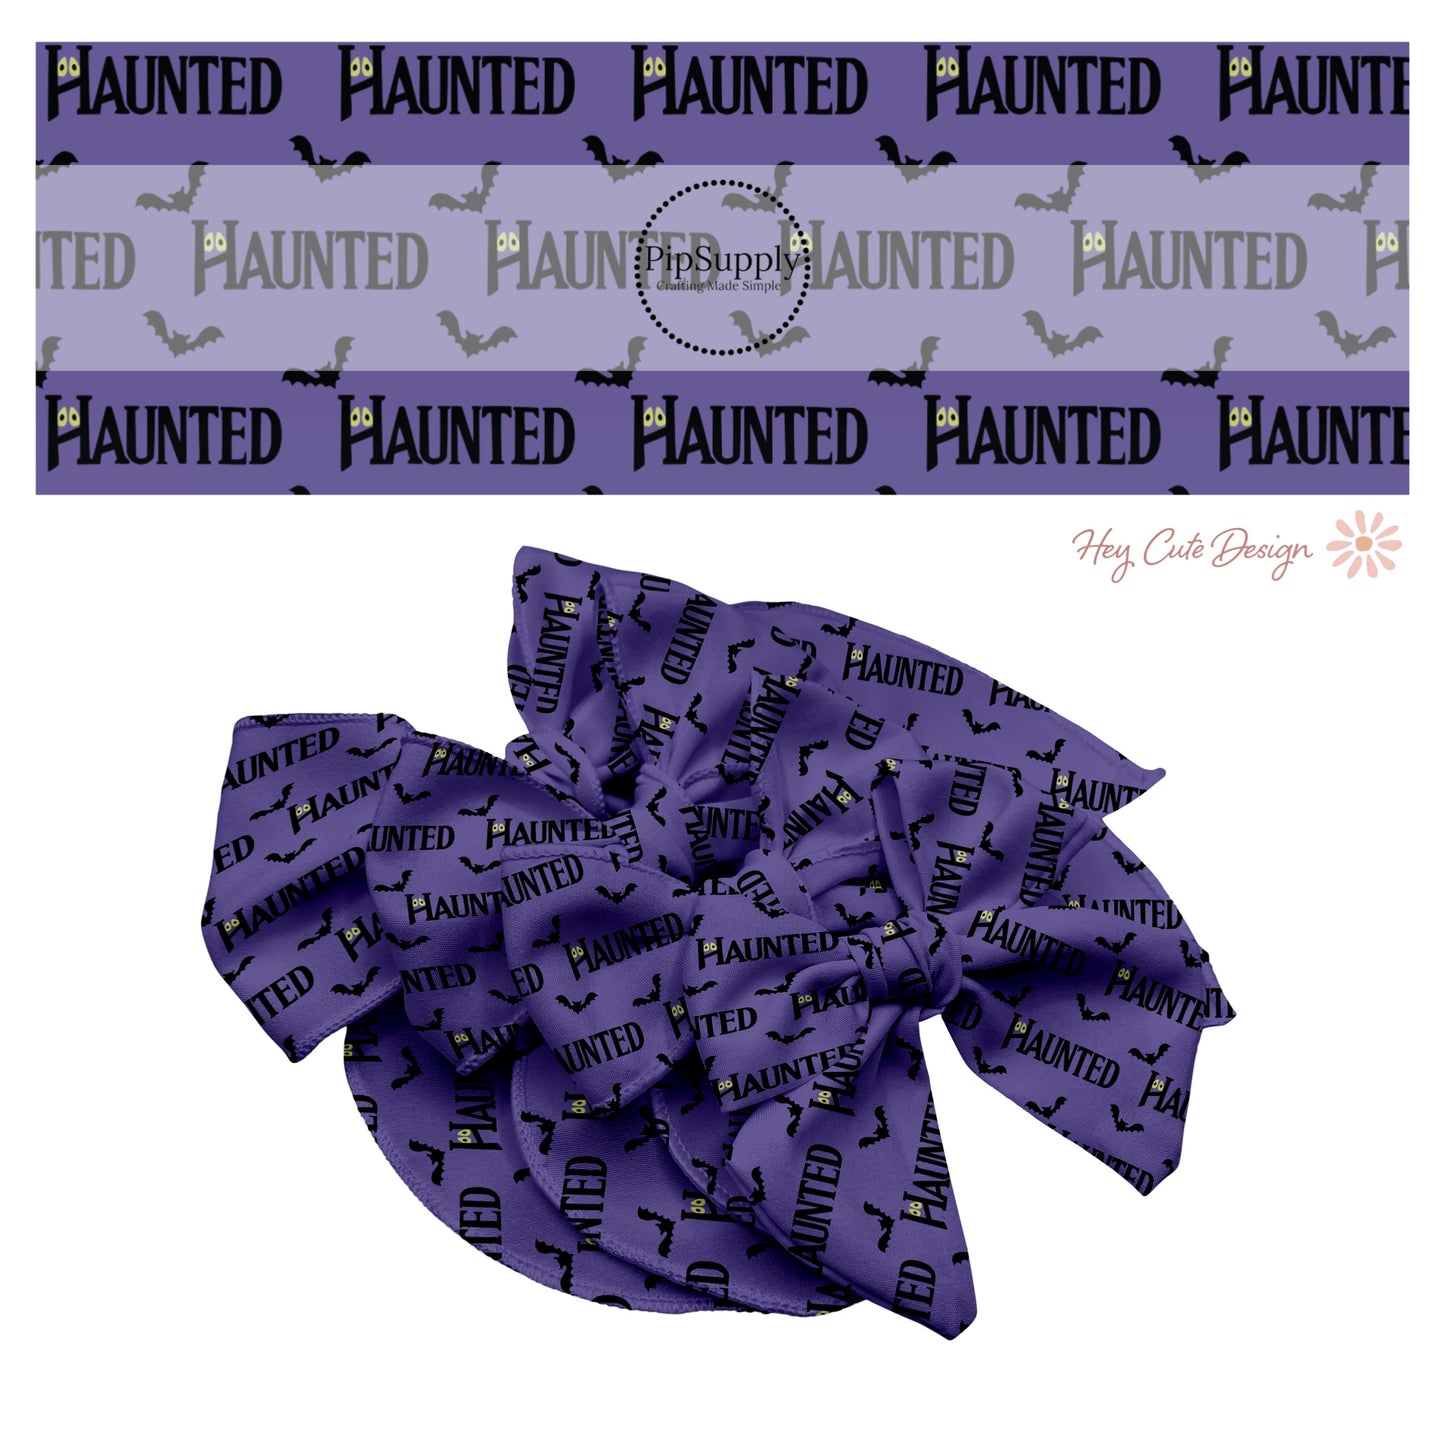 Haunted sayings with eyes and bats on purple hair bow strips